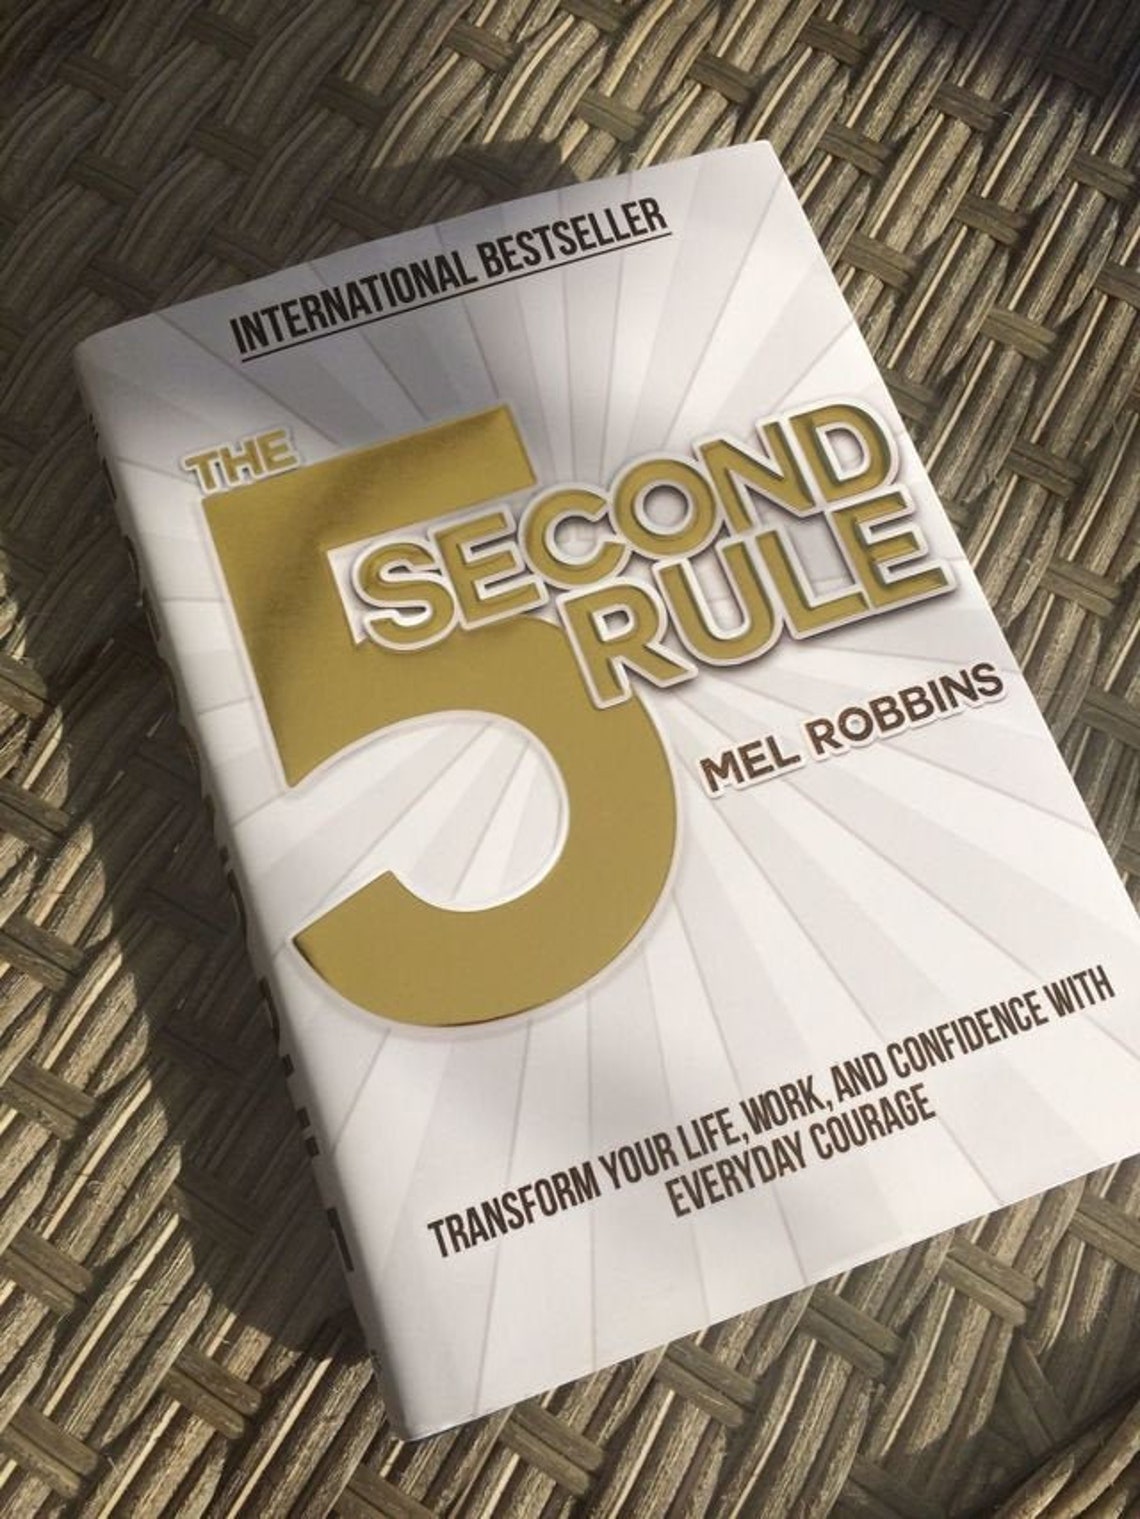 The 5Second Rule by Mel Robbins Audiobook Summary Etsy